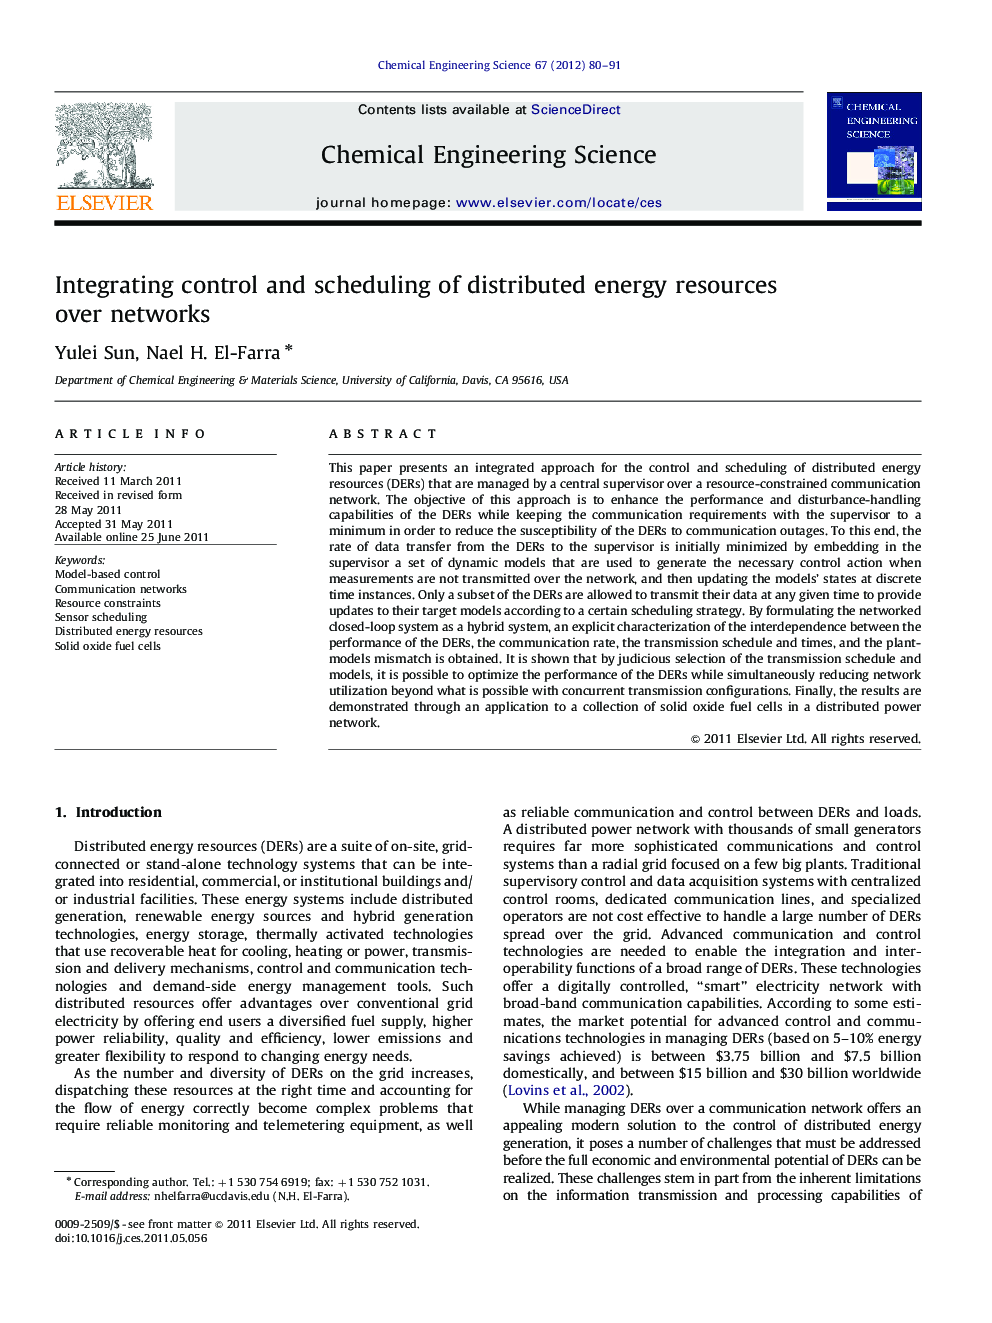 Integrating control and scheduling of distributed energy resources over networks